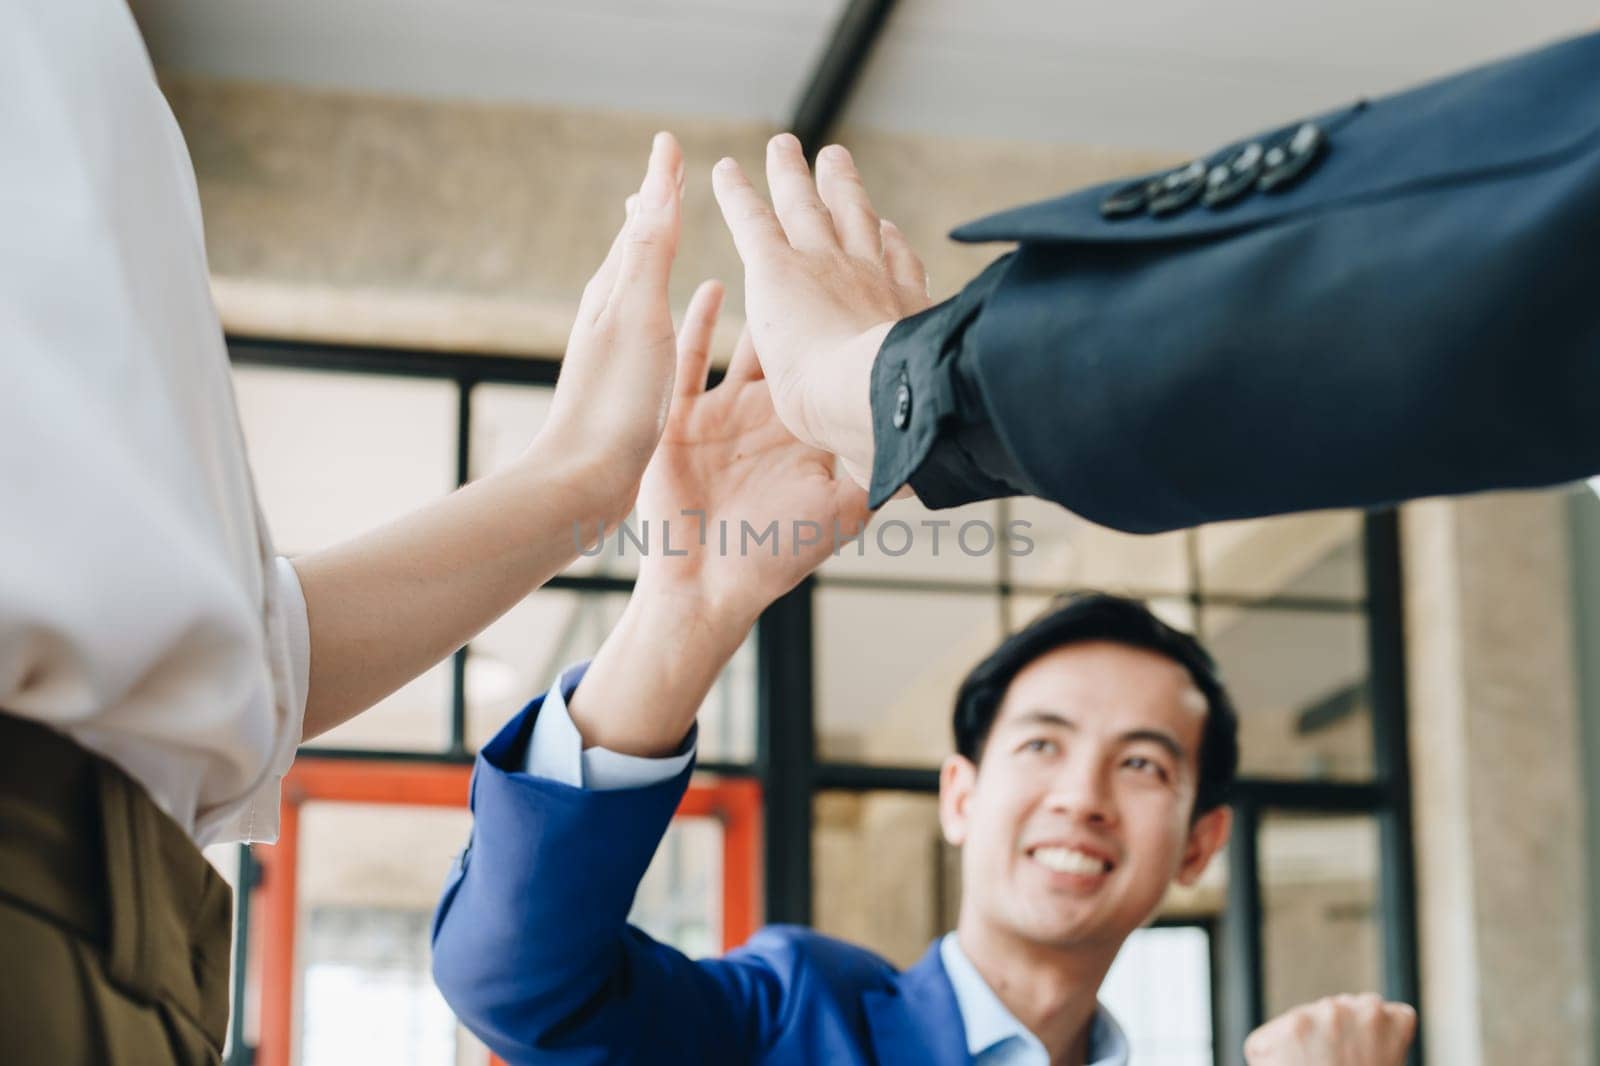 Business Success concept with partner, Partnership Giving Fist Bump after Complete a deal. Successful Teamwork, Businessman with Team Agreement in Corporate